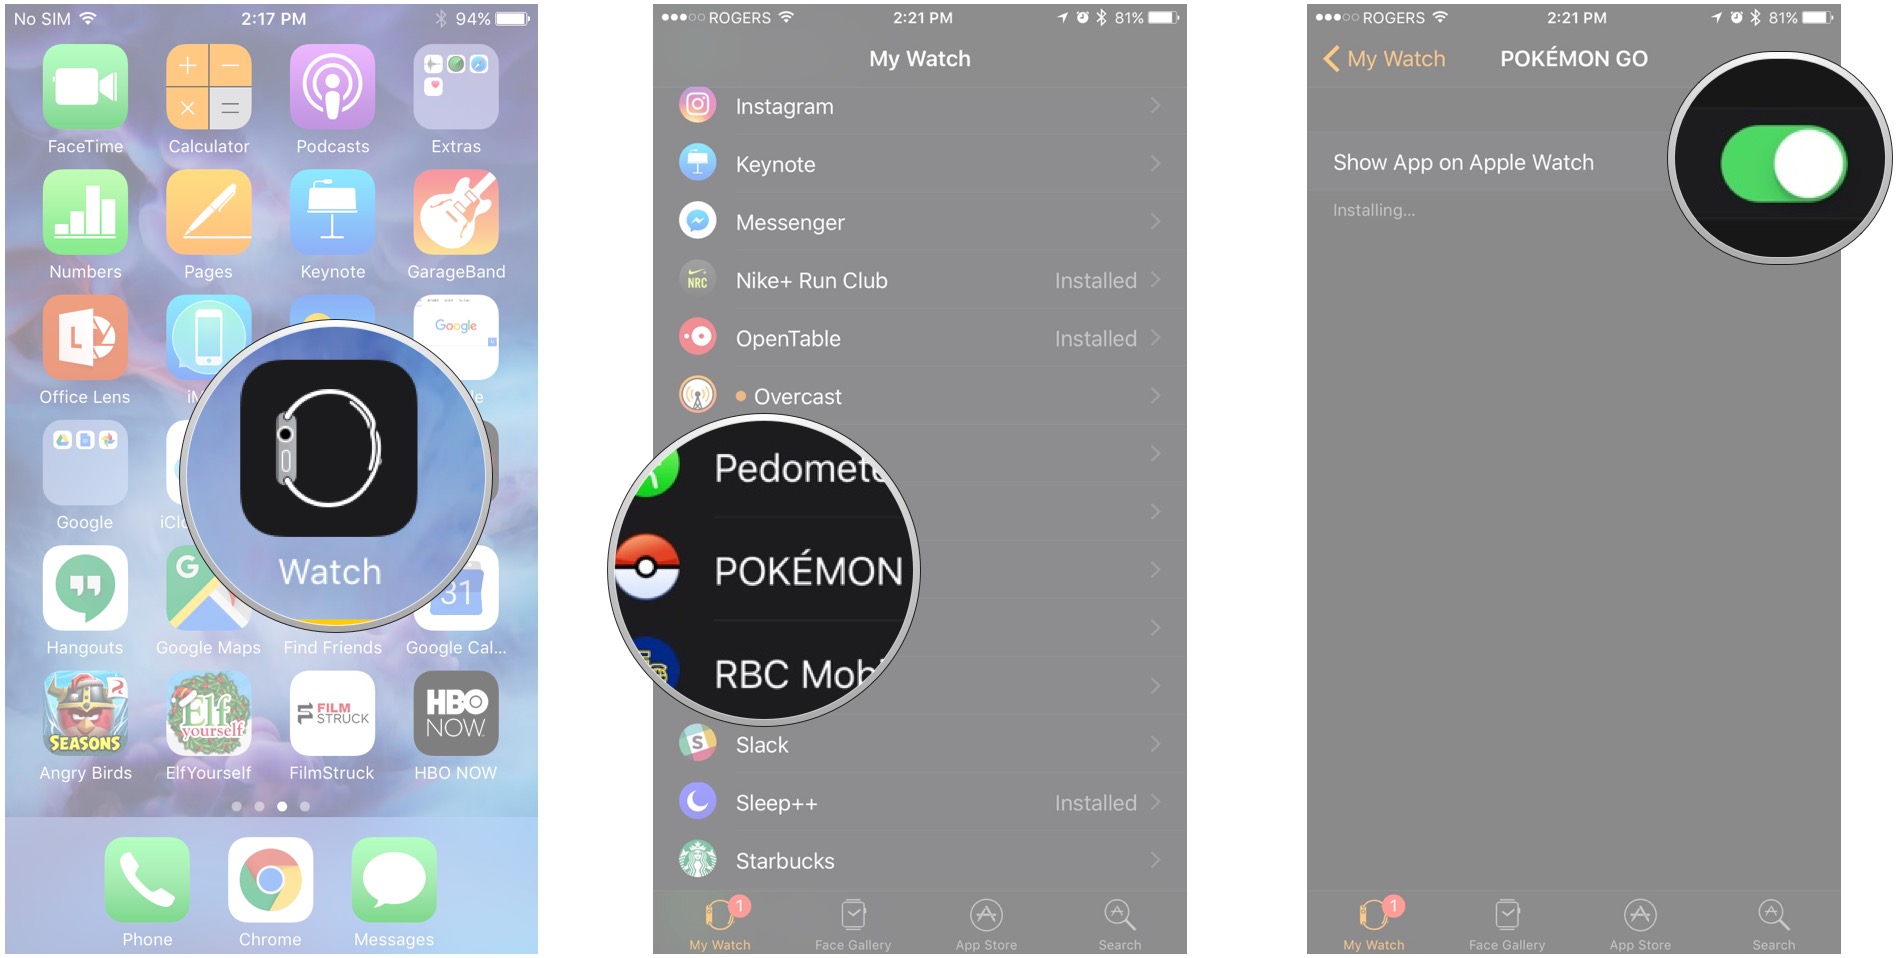 Launch the Watch app, tap Pokémon Go, tap the switch to install on Apple Watch